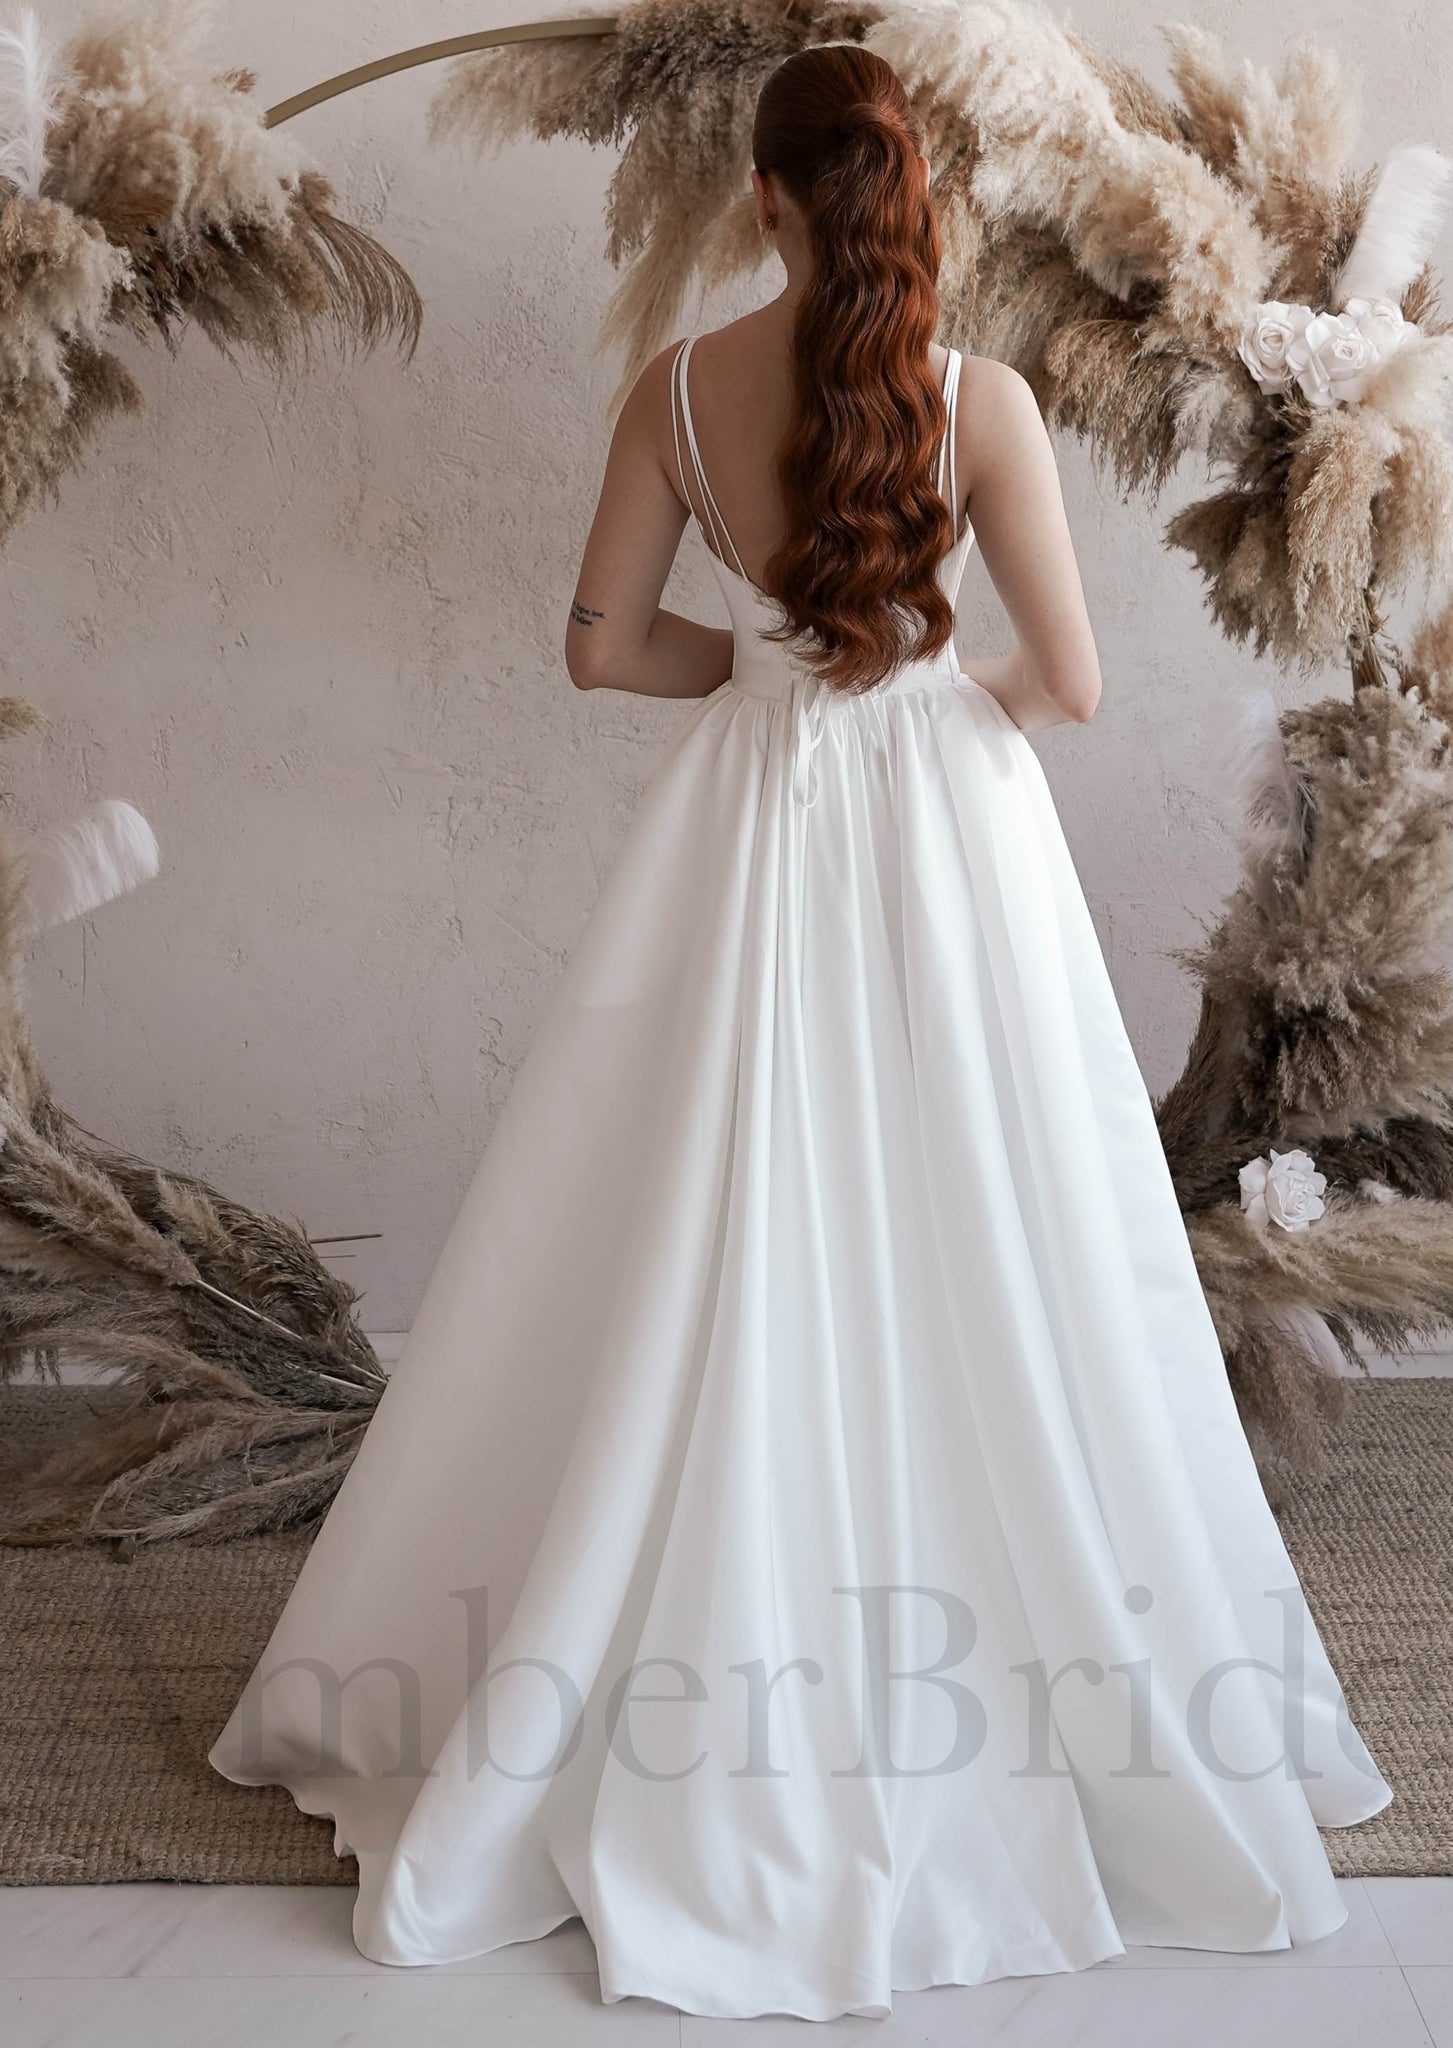 Gowns | Paloma Blanca